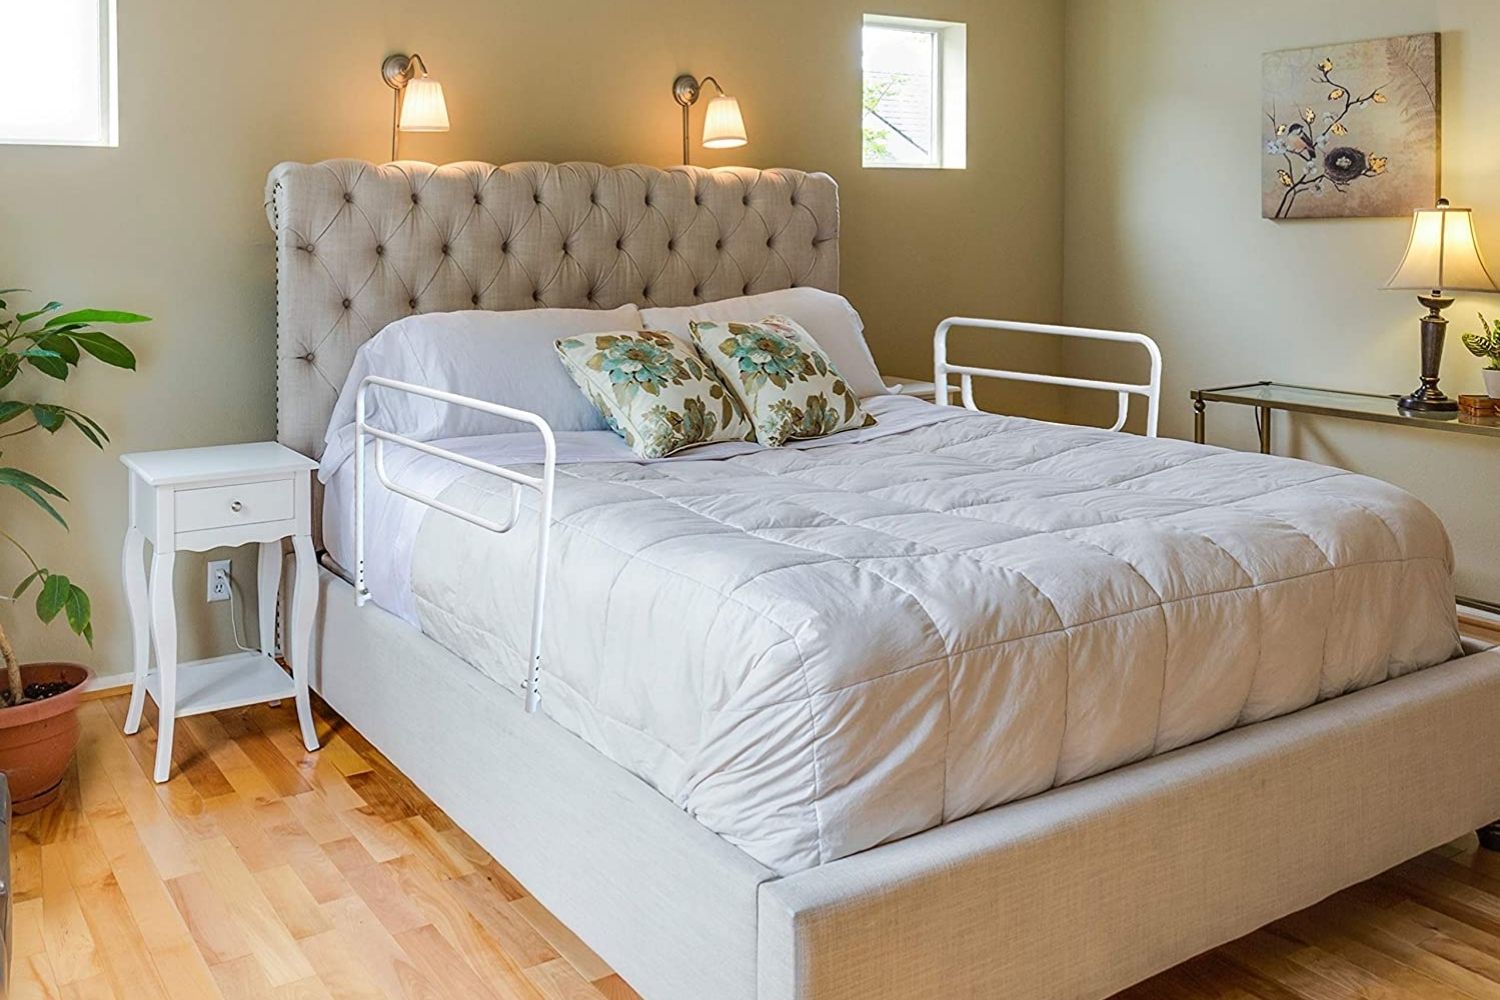 The Best Bed Rails for Seniors Options